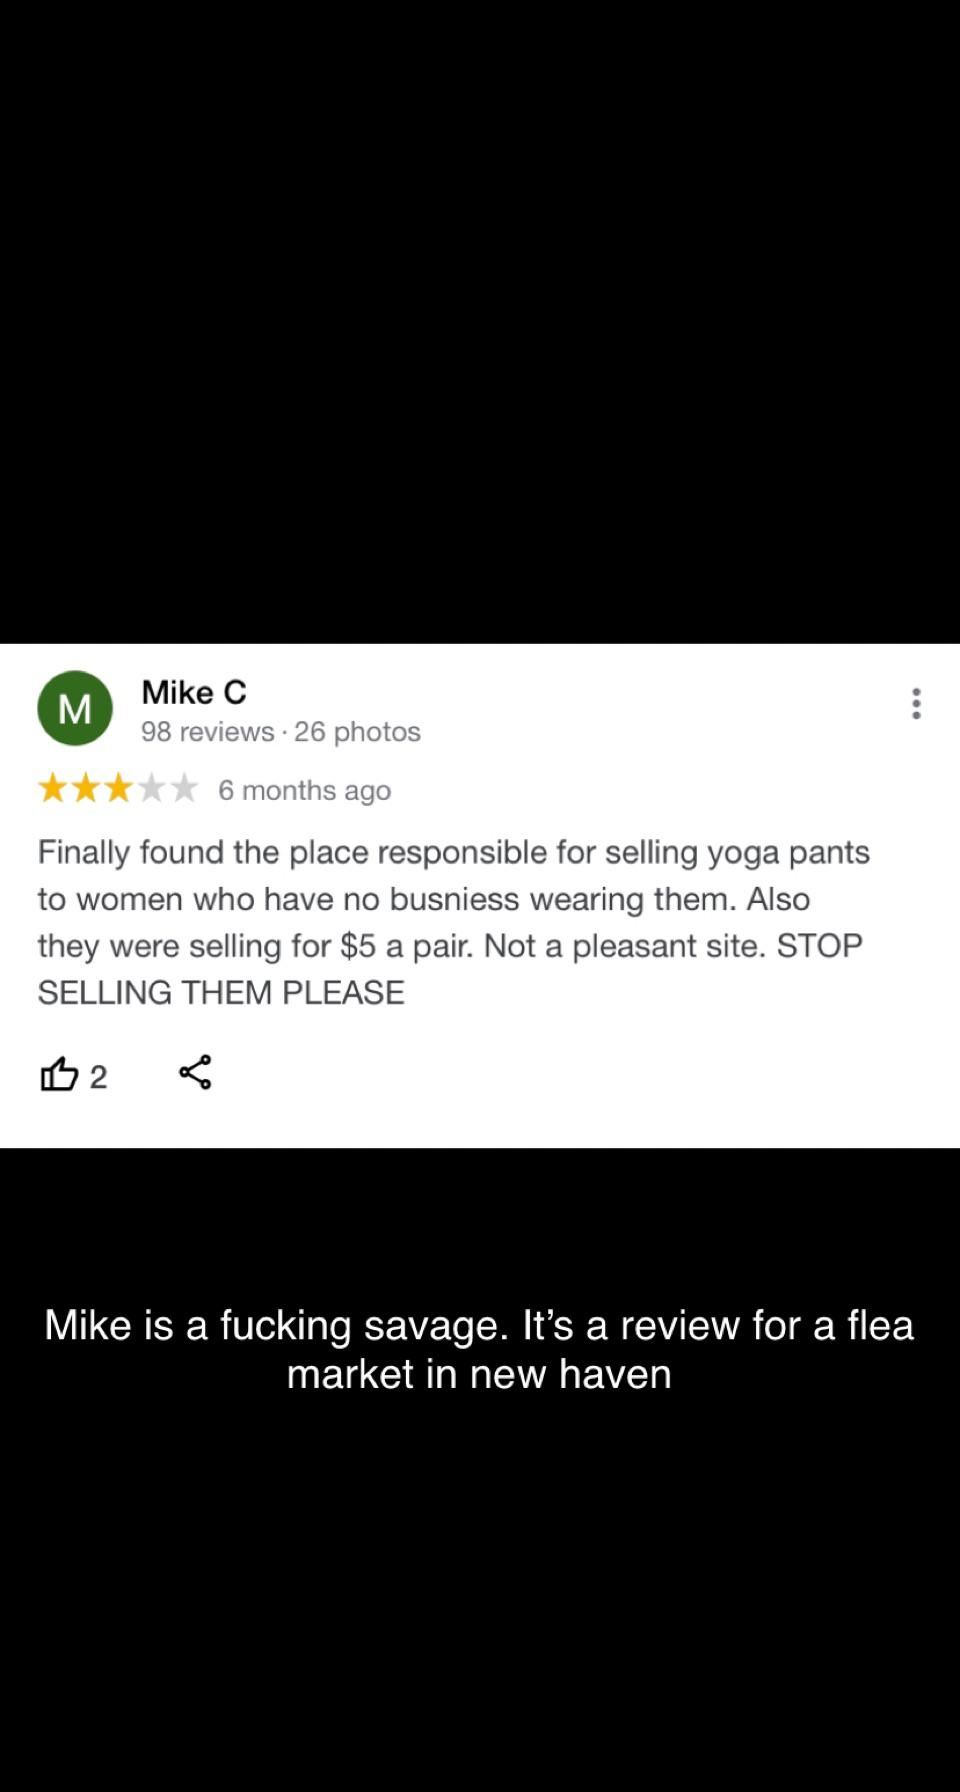 Mike is not happy